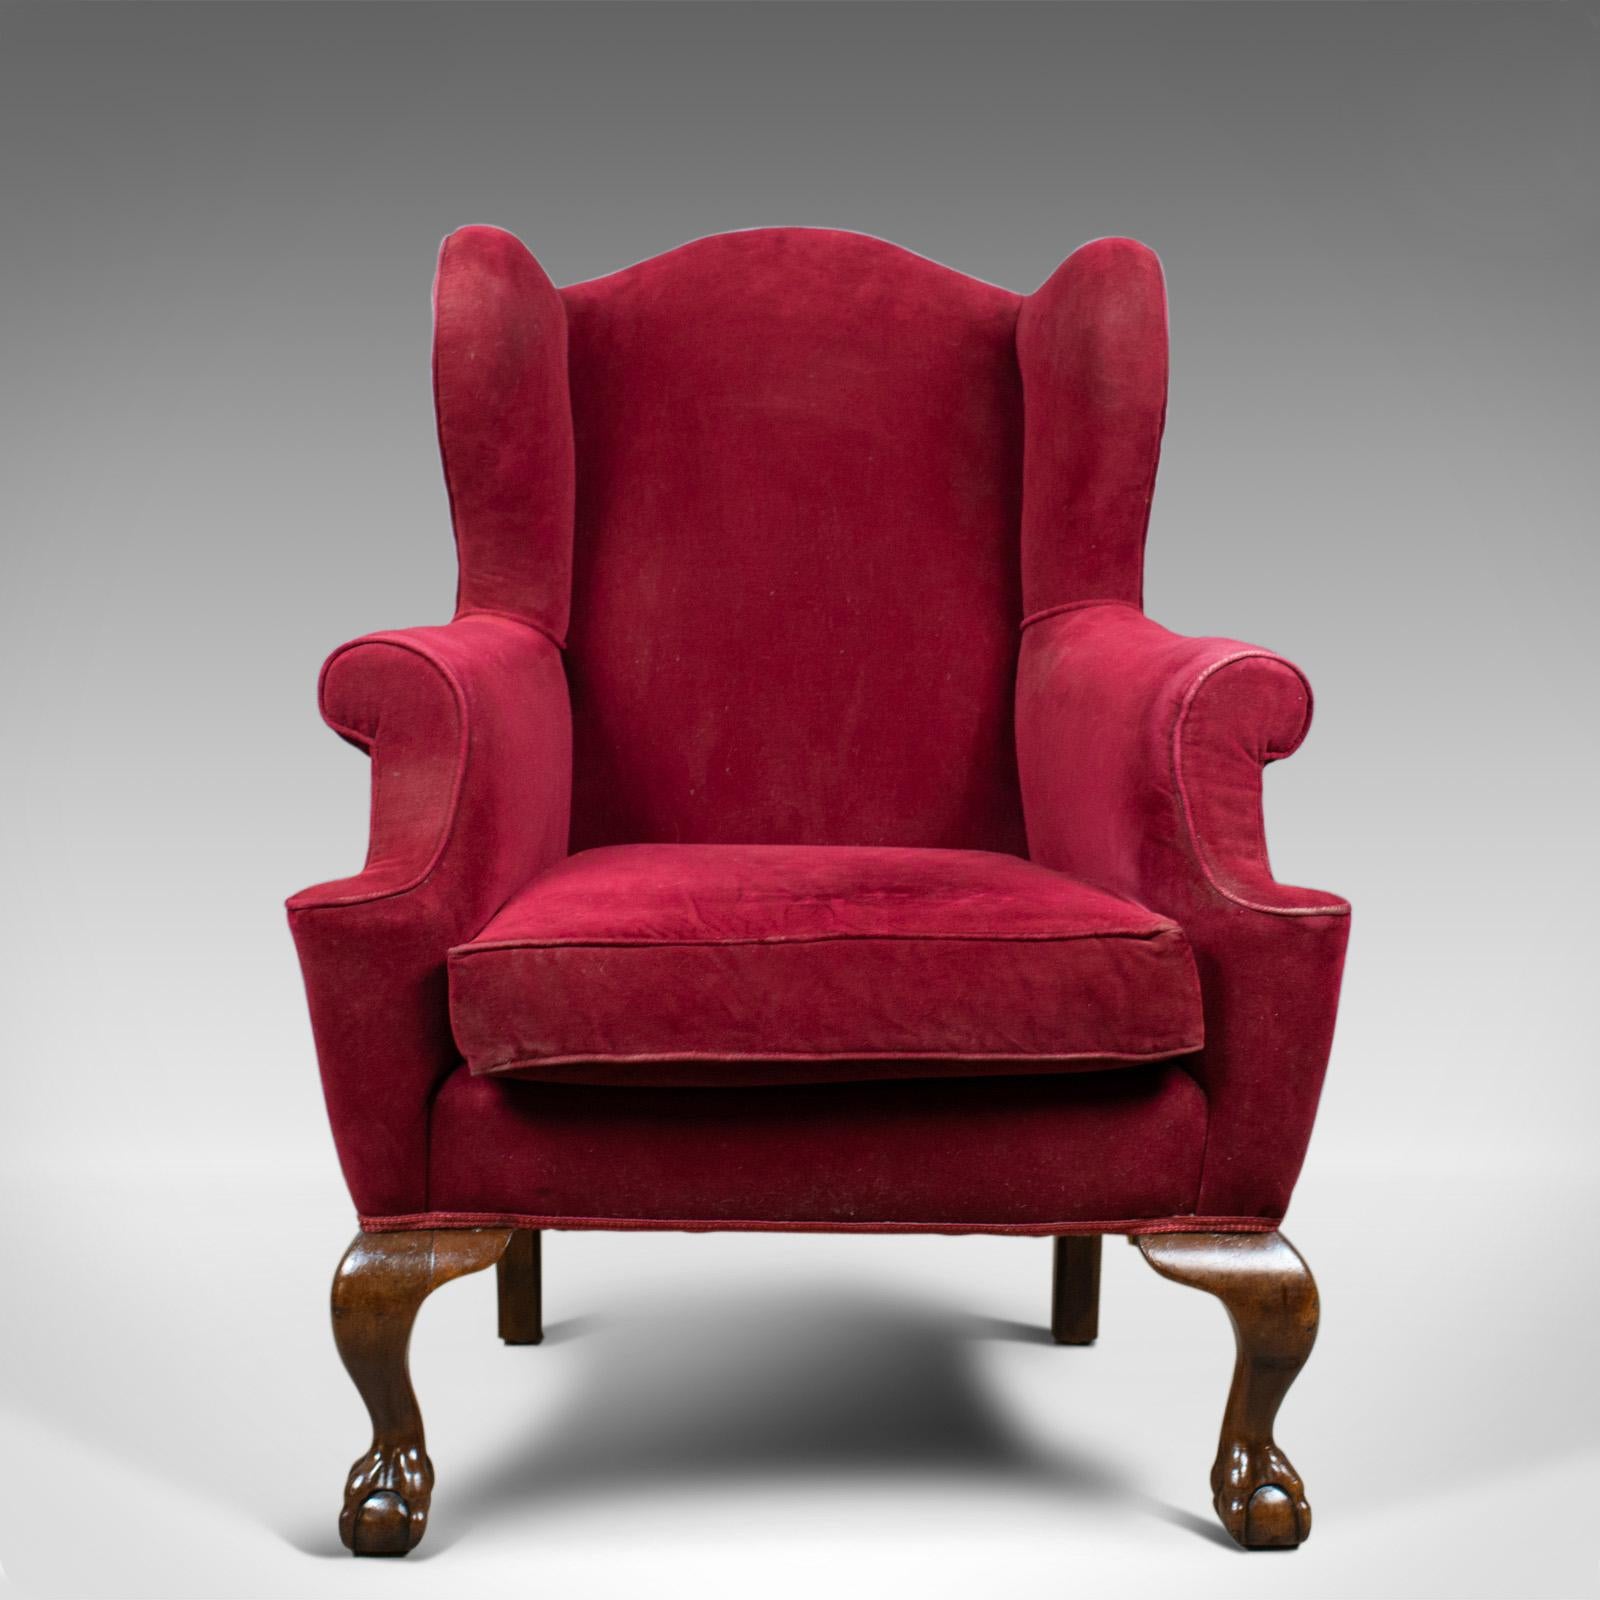 This is an antique wing back armchair. An English, late Victorian chair dating to the turn of the 20th century, circa 1900.

A large comfortable seat with loose cushion
Well sprung and professionally upholstered
Finished in a claret velour cloth